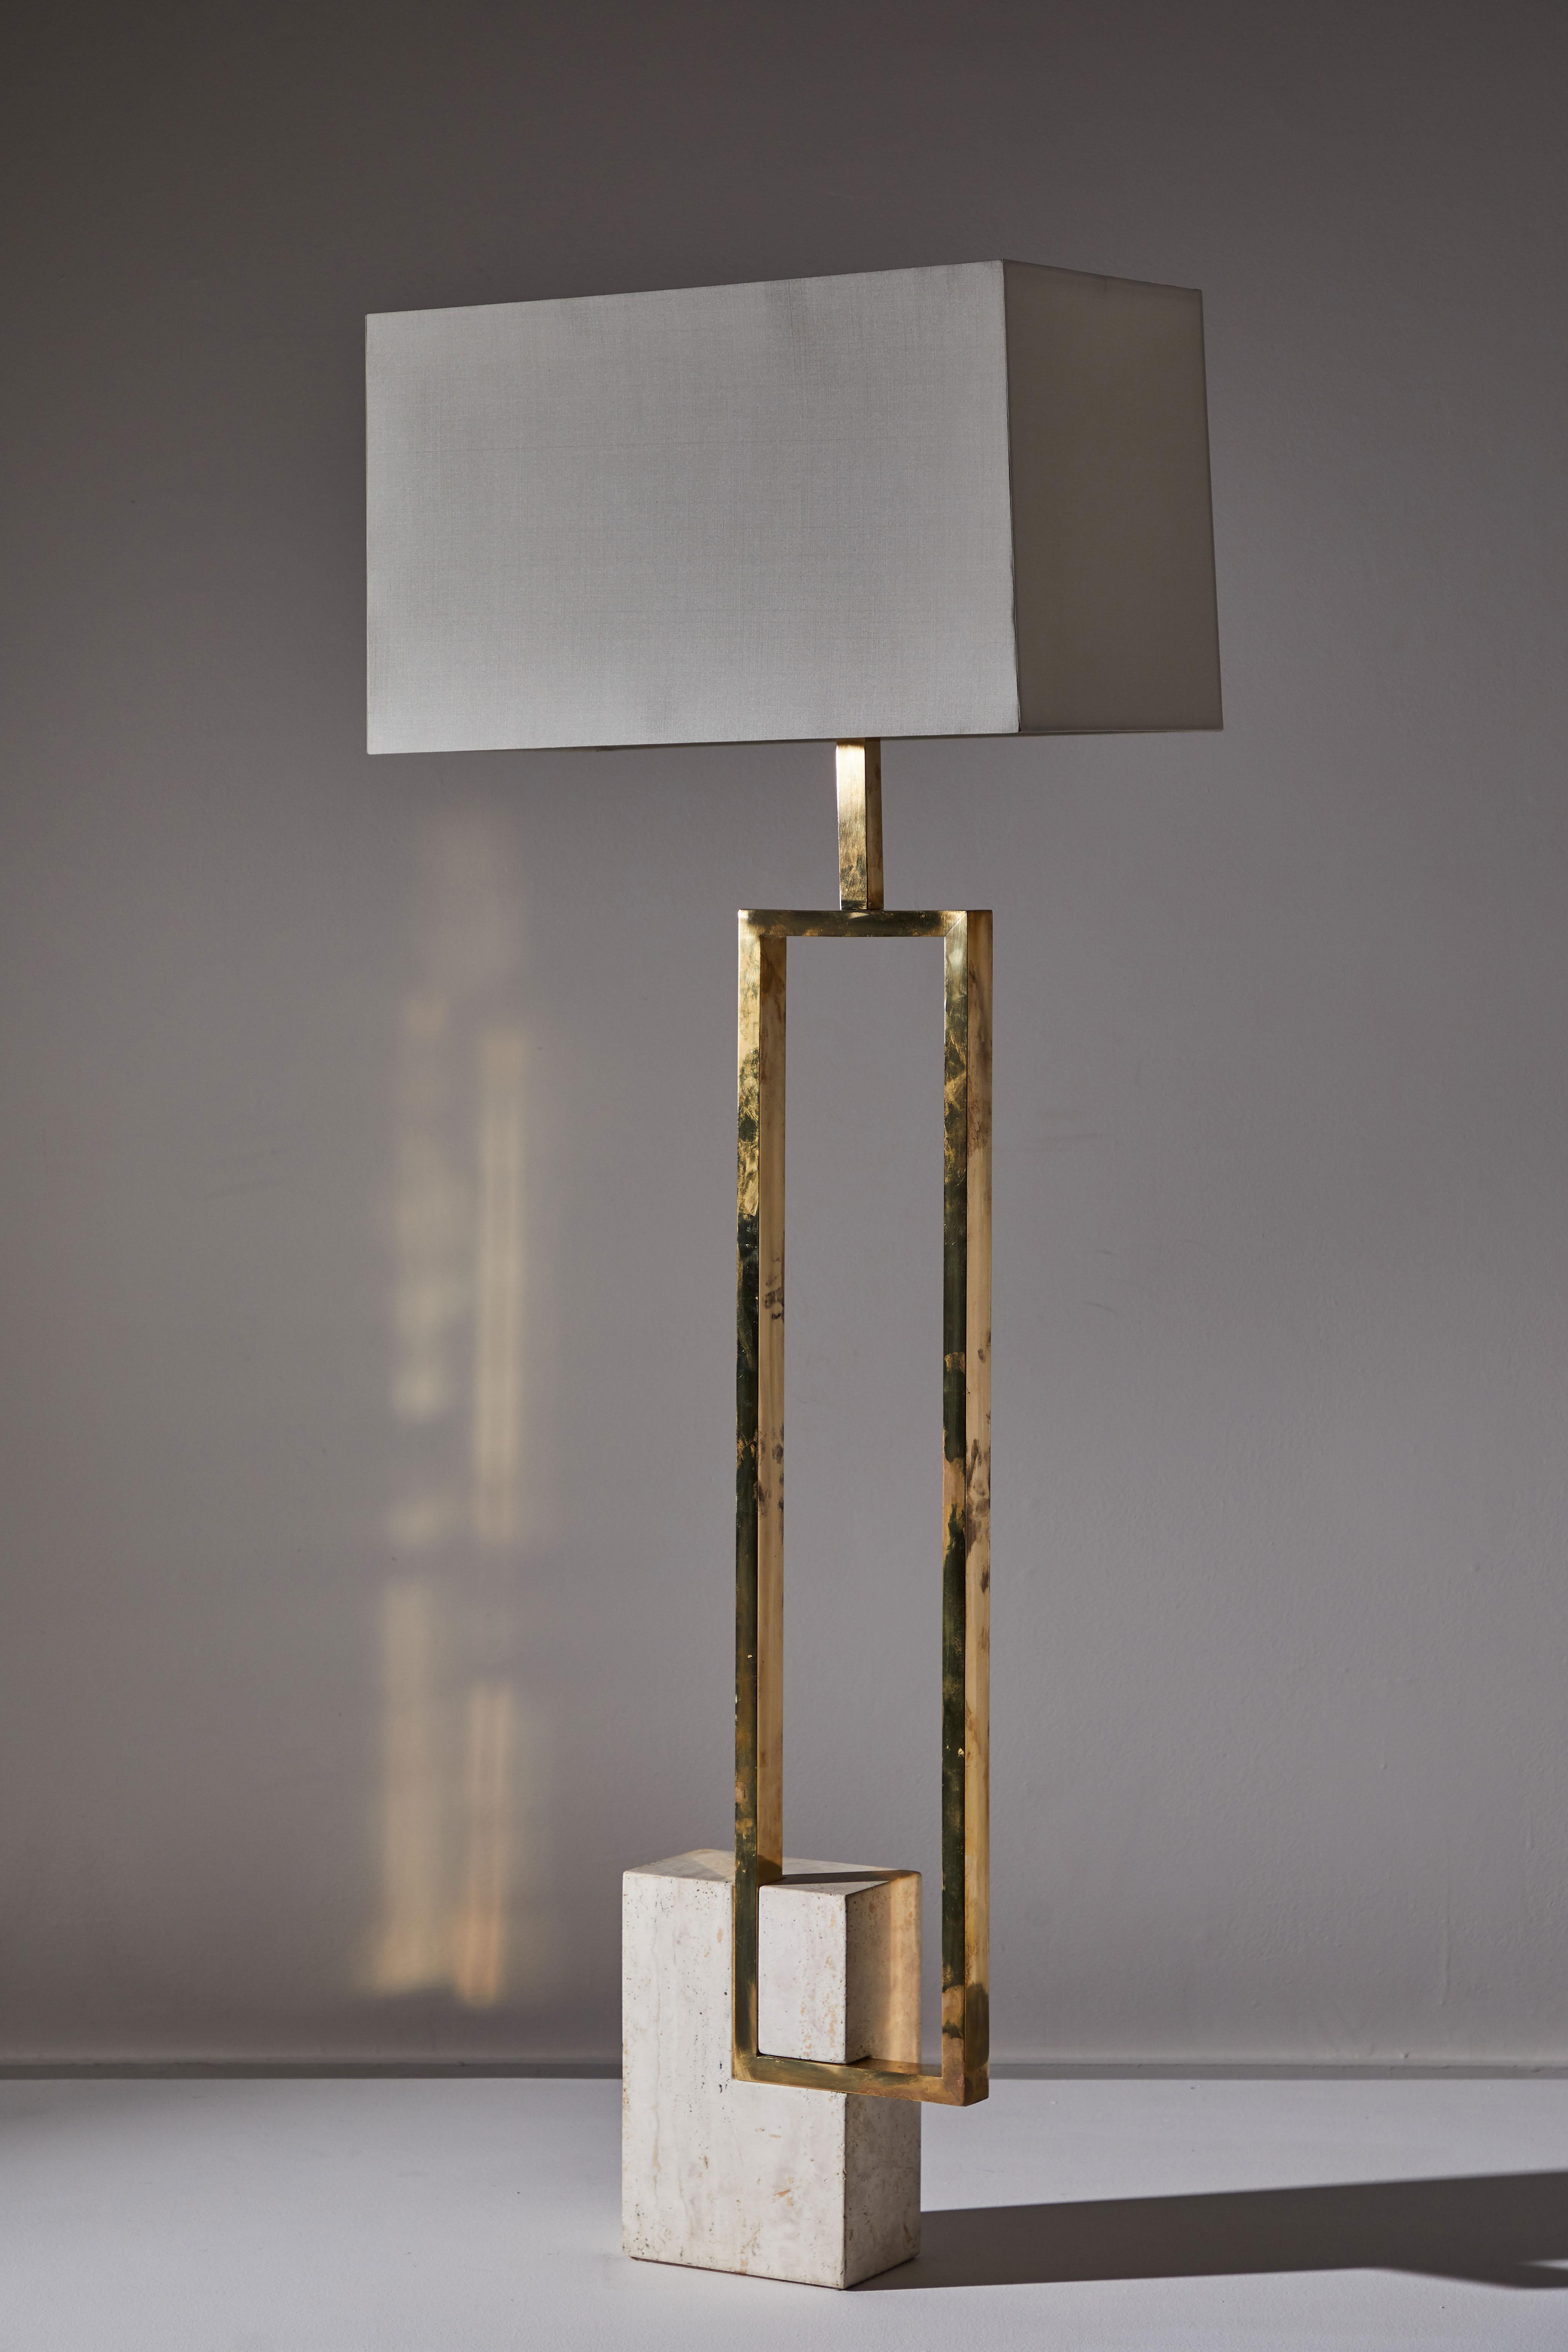 Late 20th Century Floor Lamp by Giovanni Banci for Banci Firenze